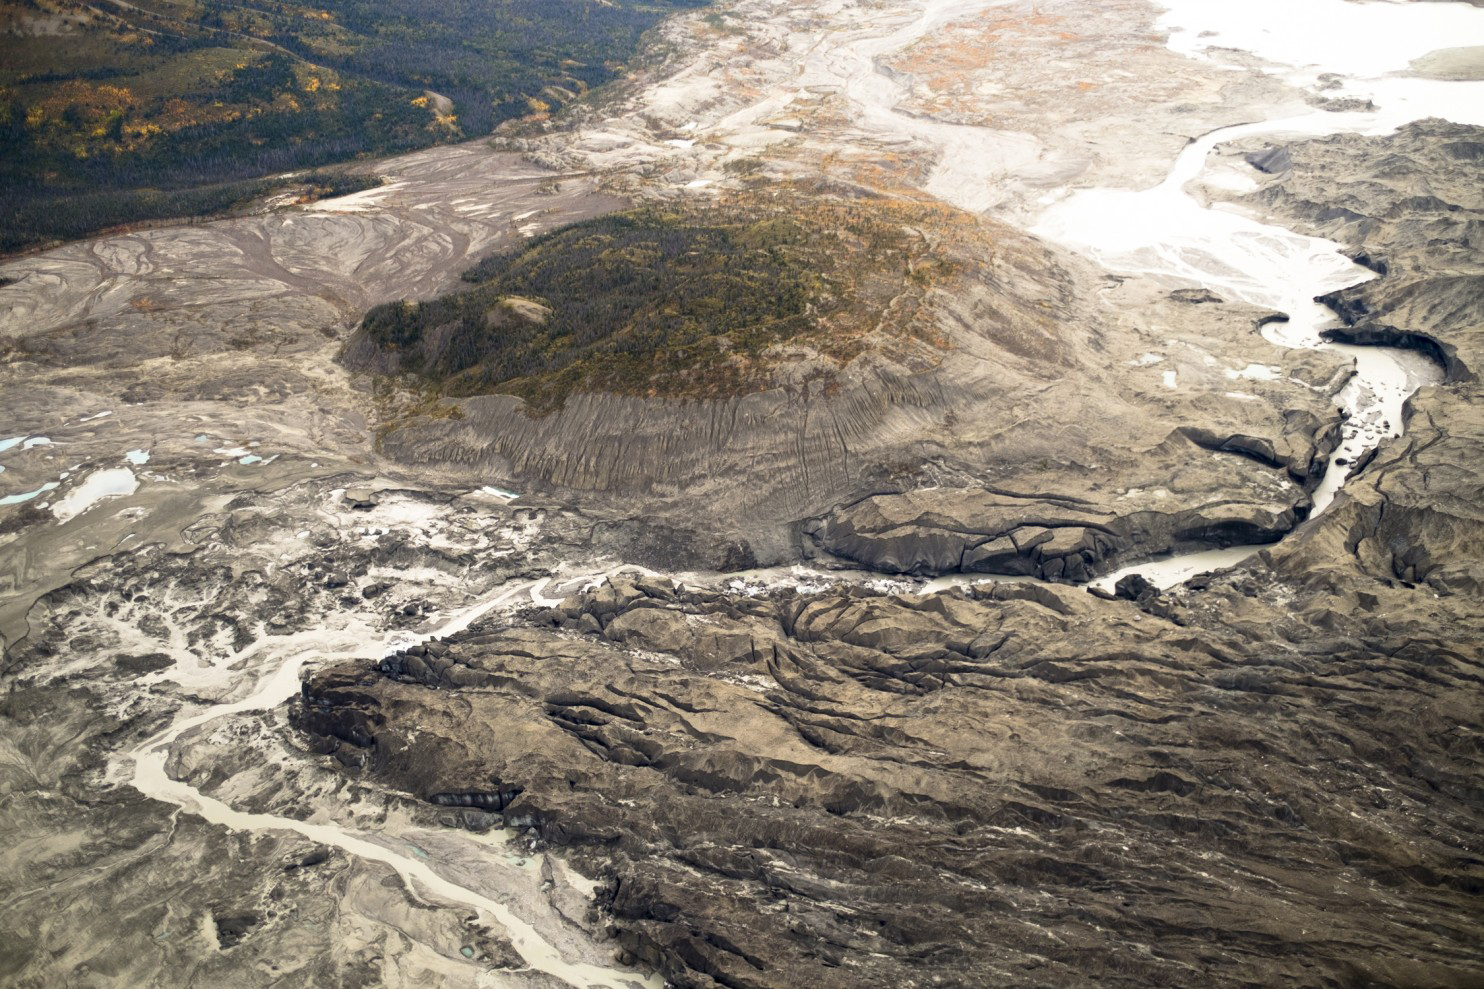 A stream flows through the toe of Kaskawulsh glacier in Canada. In 2016, this channel allowed the glacier’s meltwater to drain in a different direction than normal, resulting in the Slims River water being rerouted to a different river system. MUST (Dan Shugar)